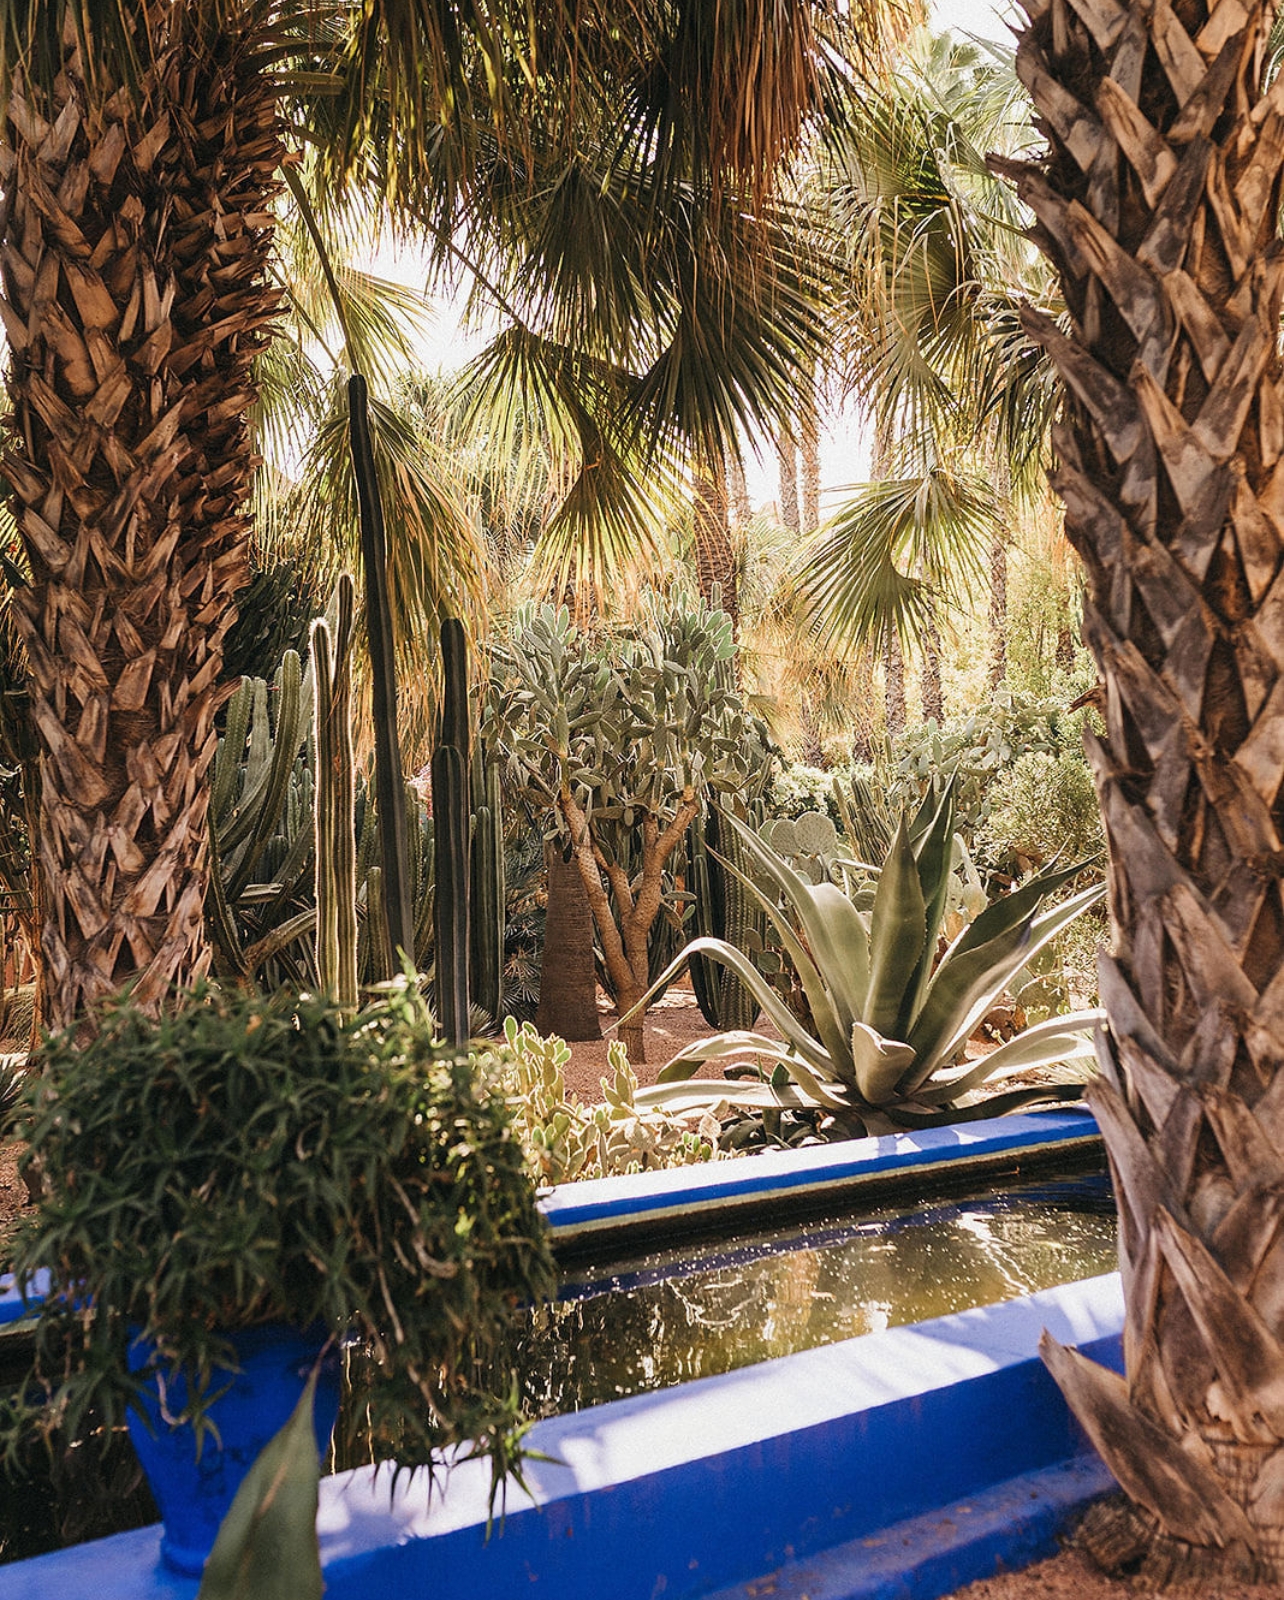 Portrait of the Majorelle Garden from last year’s Modern Adventure trip to Morocco with chef Nyesha Arrington